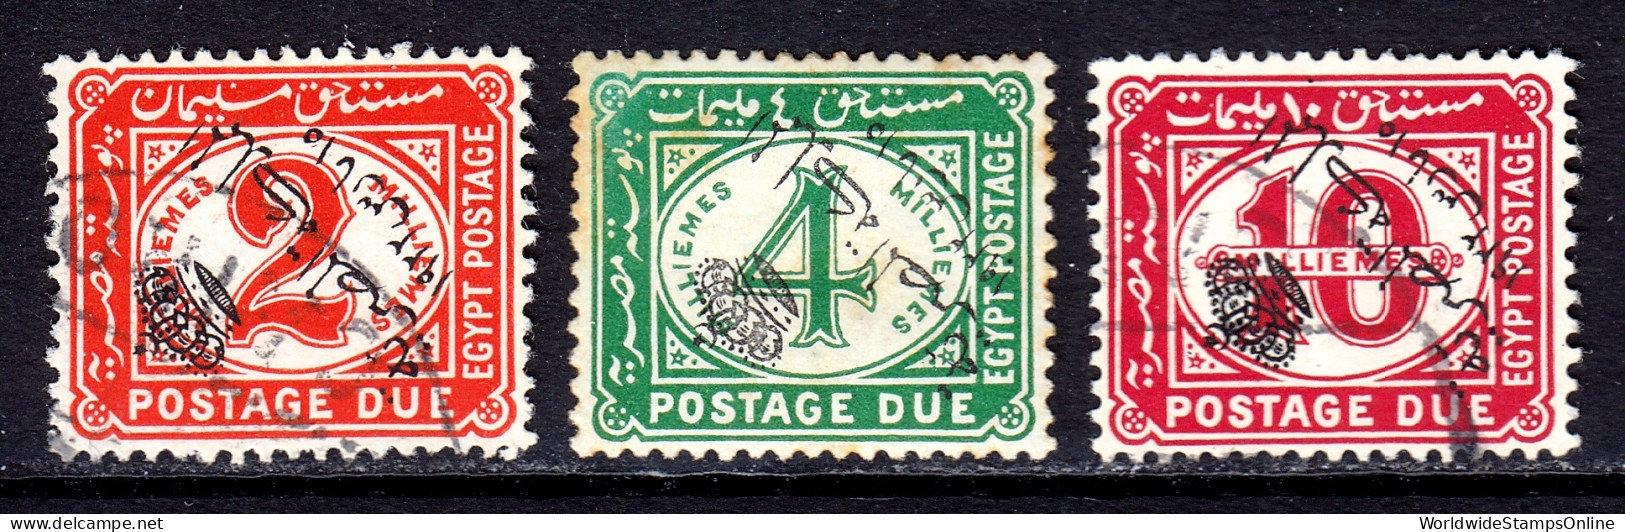 Egypt - Scott #J27//J29 - Used/MH - #J28 Is MH With Toning Spots - SCV $6.50 - Used Stamps